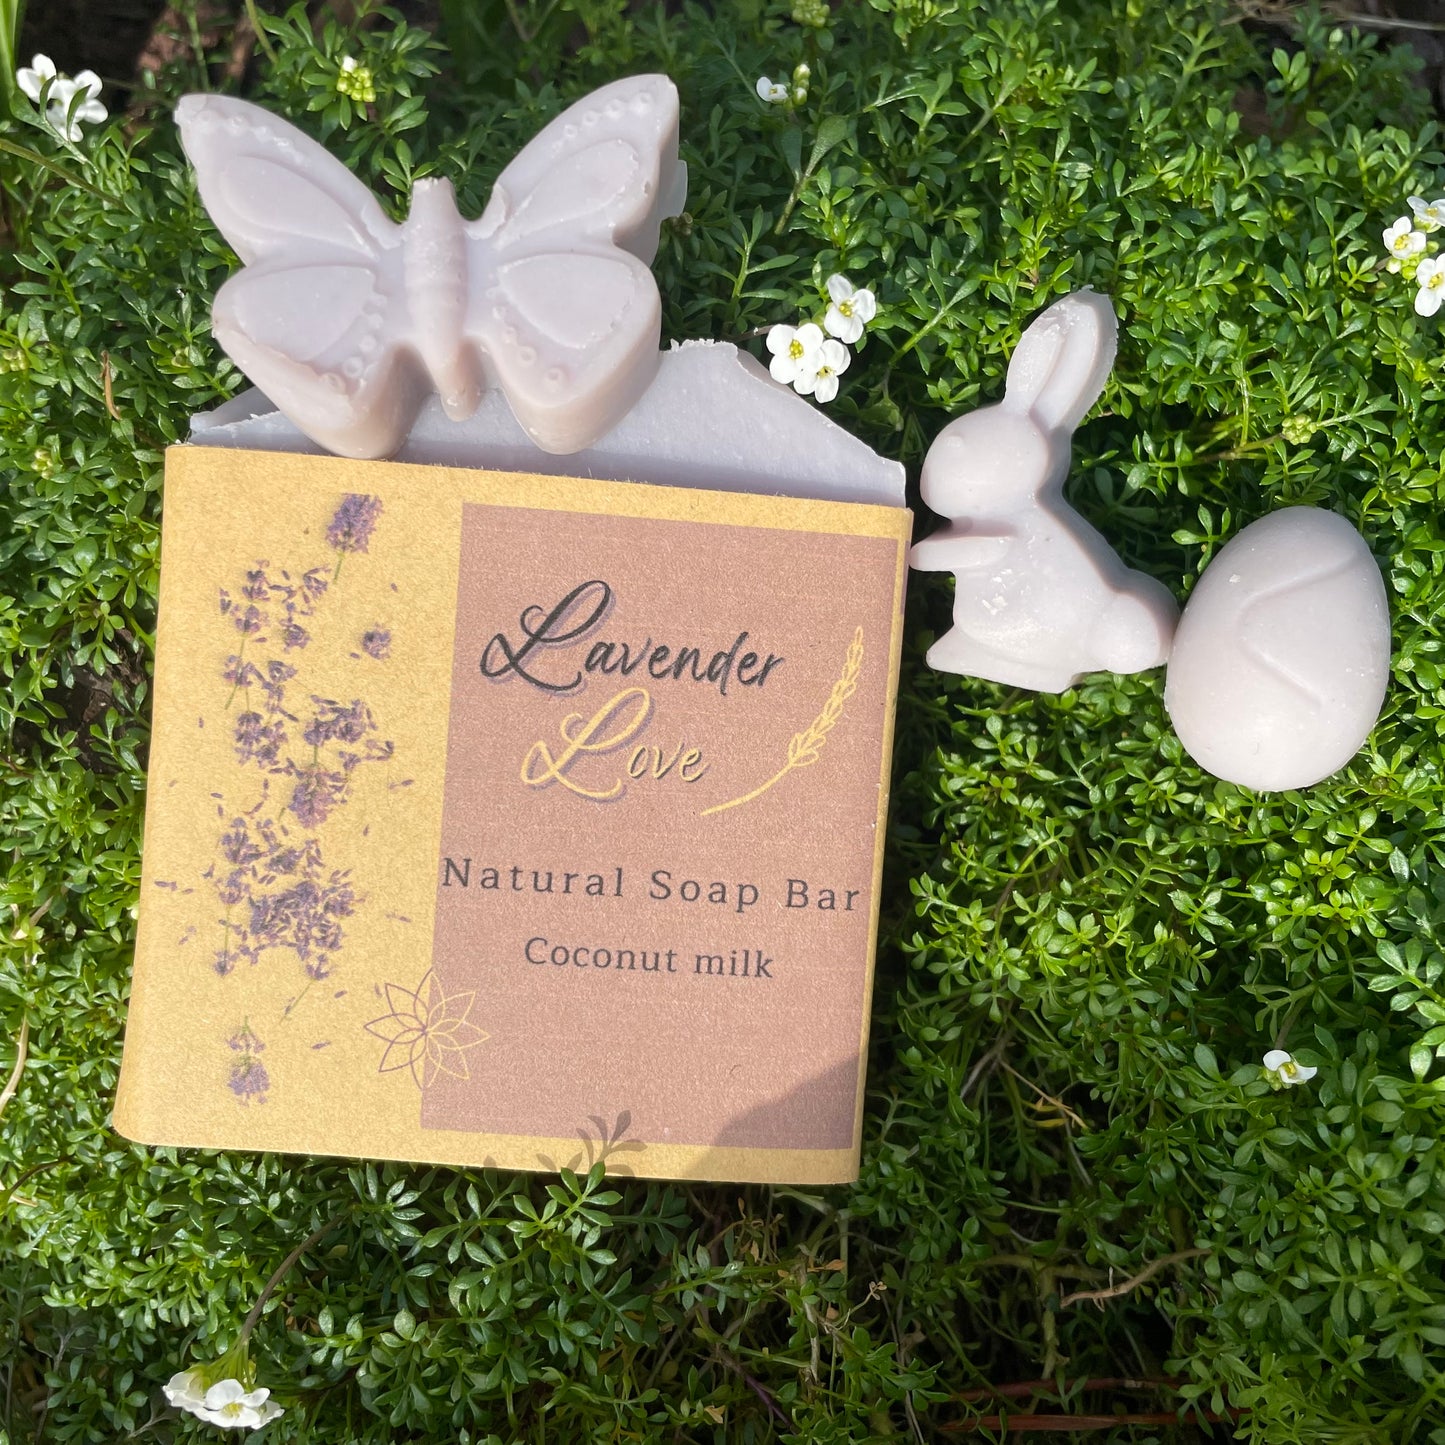 Lavender love natural handcrafted vegan soap, natural coloured, with a purple pastel tone, made with coconut milk, and relaxing lavender essential oil. the photo show the front side of the soap bar and 3 samples in the shape of a butterfly, a bunny and an easter egg, all on a bed of wild flowers